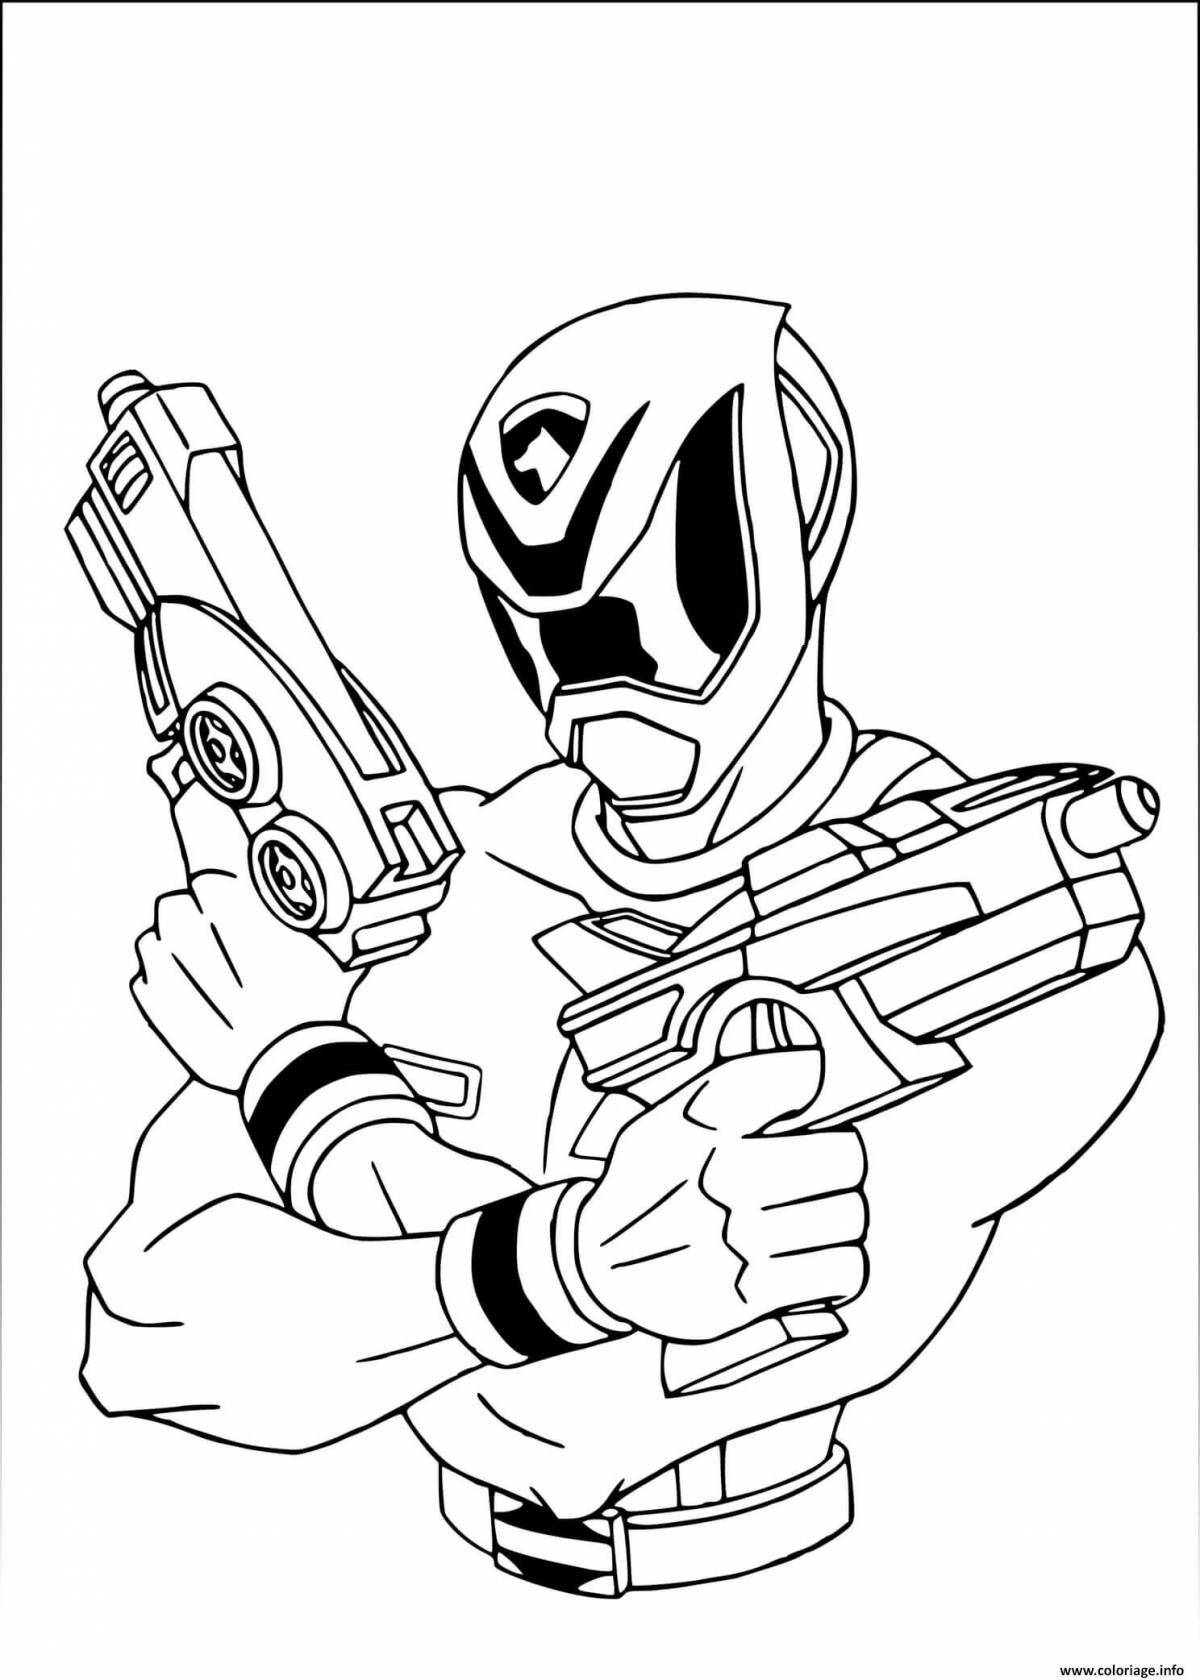 Innovative gearfighter coloring book